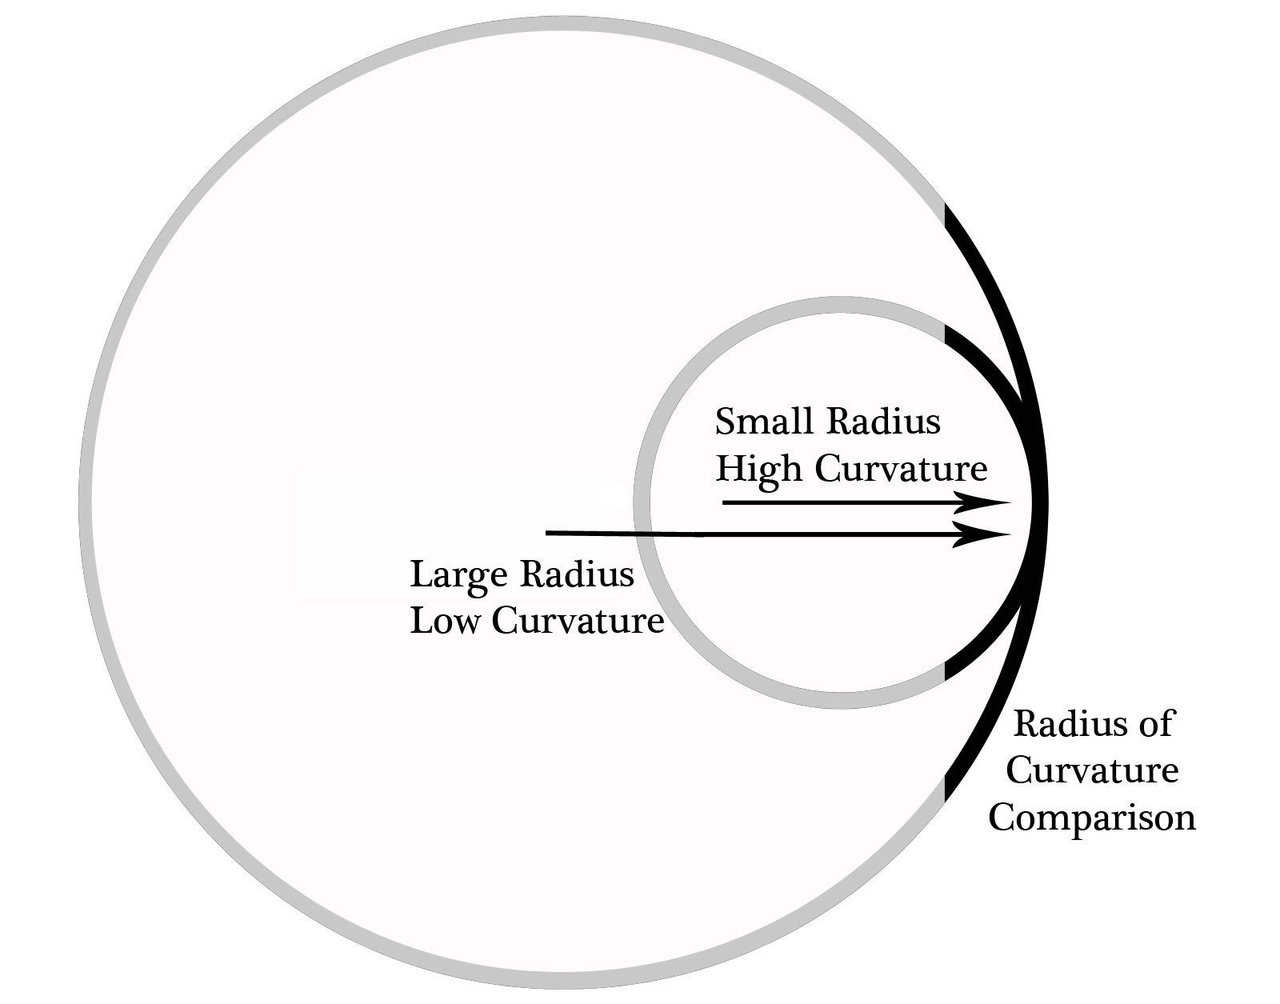 Figure 1 — Comparison of Radii of Curvature showing small radius with high curvature vs large radius with low curvature.